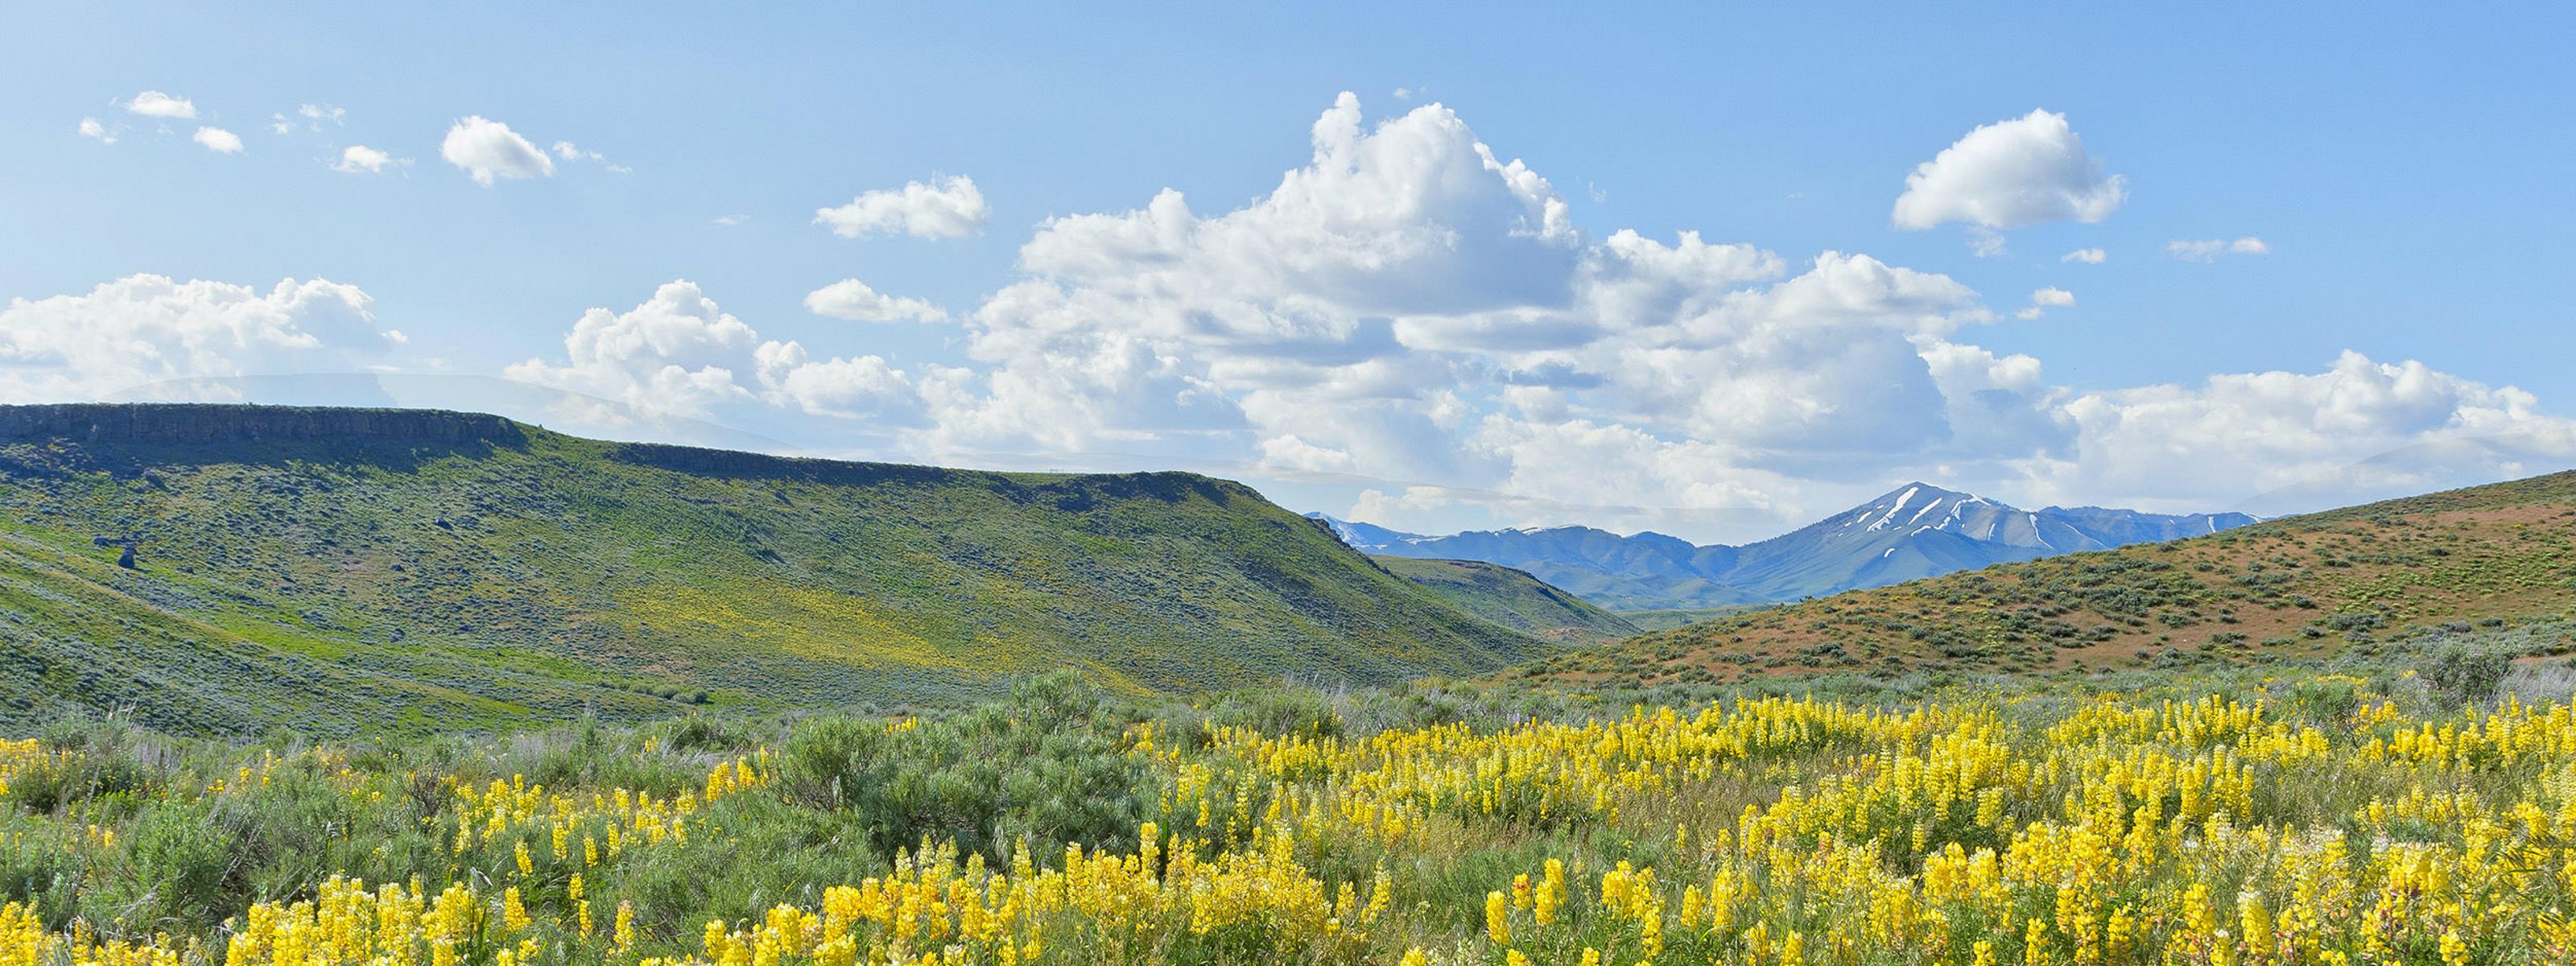 Sweeping landscape view of a field of yellow wildflowers growing in a valley, with mountains in the background.